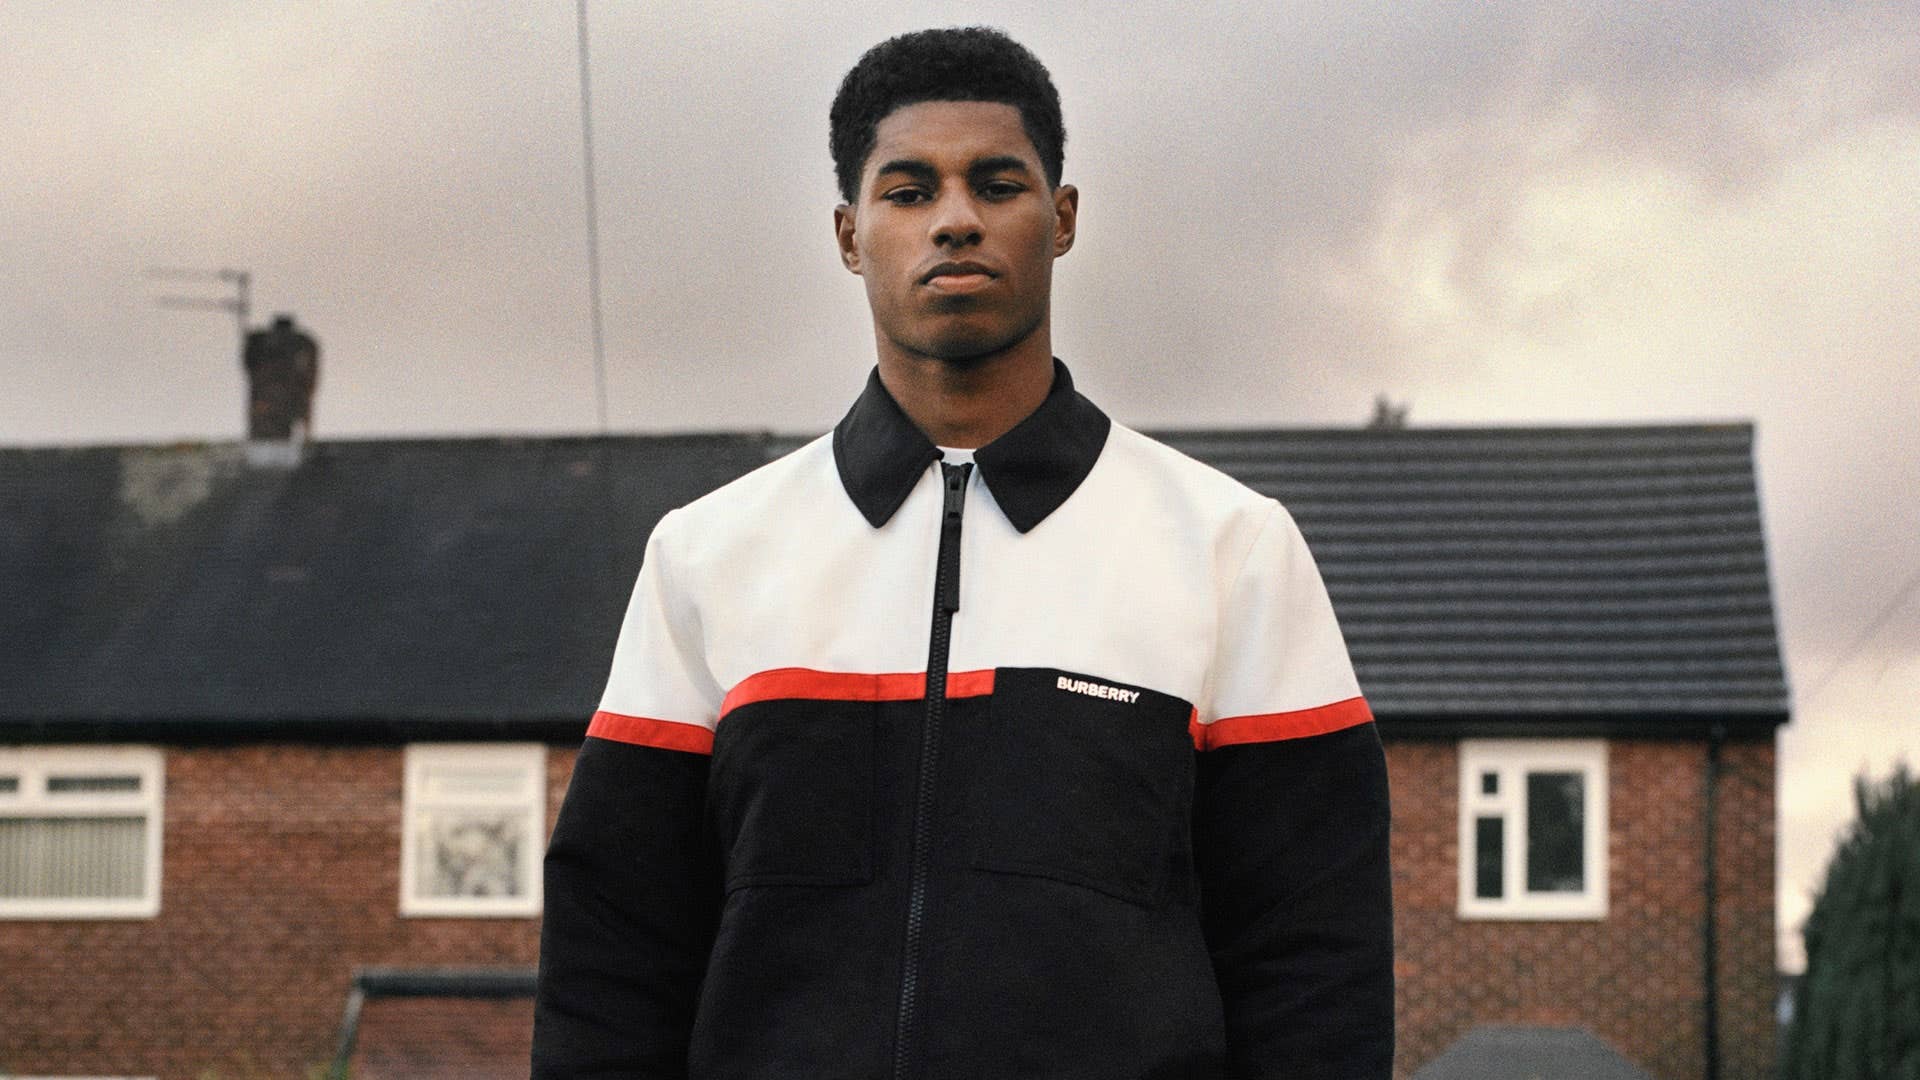 burberry supports youth in partnership with marcus rashford